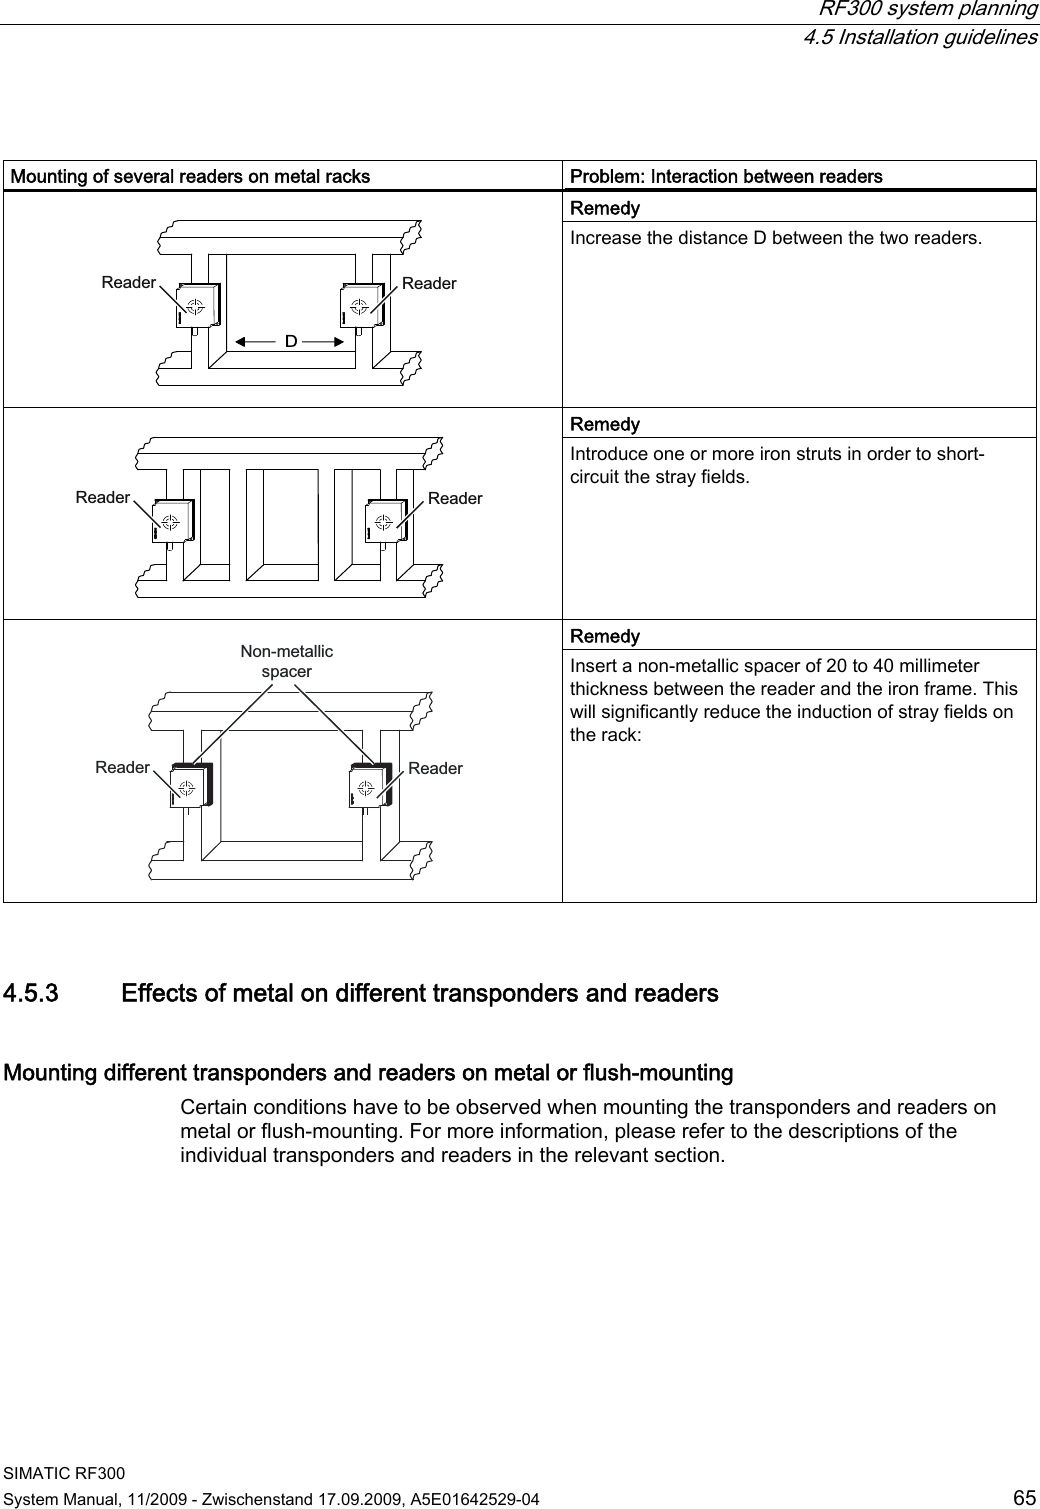  RF300 system planning  4.5 Installation guidelines SIMATIC RF300 System Manual, 11/2009 - Zwischenstand 17.09.2009, A5E01642529-04  65   Mounting of several readers on metal racks  Problem: Interaction between readers Remedy  &apos;5HDGHU 5HDGHU  Increase the distance D between the two readers. Remedy  5HDGHU 5HDGHU  Introduce one or more iron struts in order to short-circuit the stray fields. Remedy  1RQPHWDOOLFVSDFHU5HDGHU 5HDGHU  Insert a non-metallic spacer of 20 to 40 millimeter thickness between the reader and the iron frame. This will significantly reduce the induction of stray fields on the rack:  4.5.3 Effects of metal on different transponders and readers Mounting different transponders and readers on metal or flush-mounting Certain conditions have to be observed when mounting the transponders and readers on metal or flush-mounting. For more information, please refer to the descriptions of the individual transponders and readers in the relevant section. 